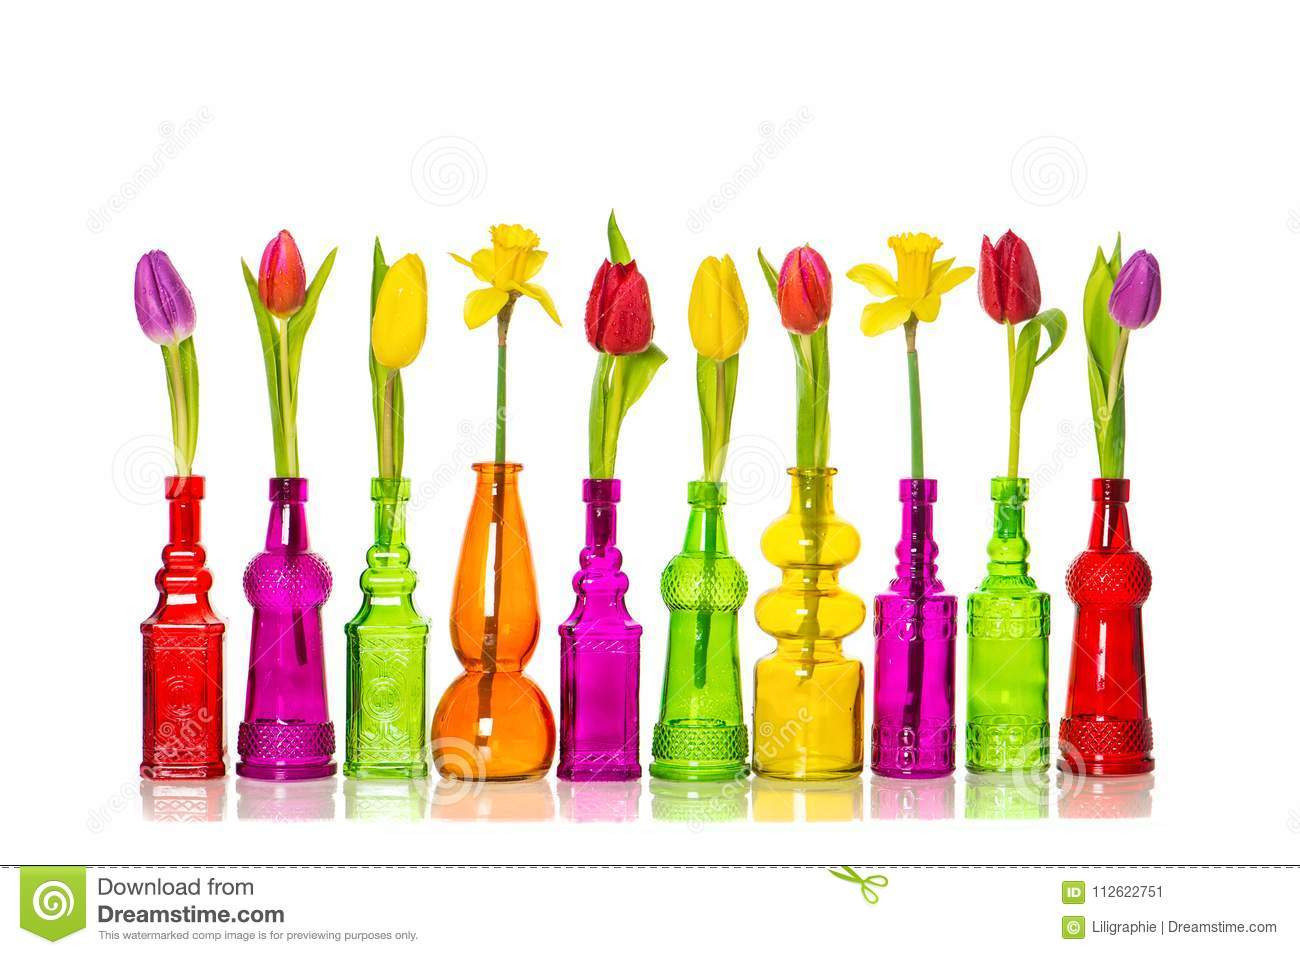 19 Lovable Rustic Wood Flower Vases 2024 free download rustic wood flower vases of spring flowers decoration tulips in vases white background stock for download spring flowers decoration tulips in vases white background stock image image of spri